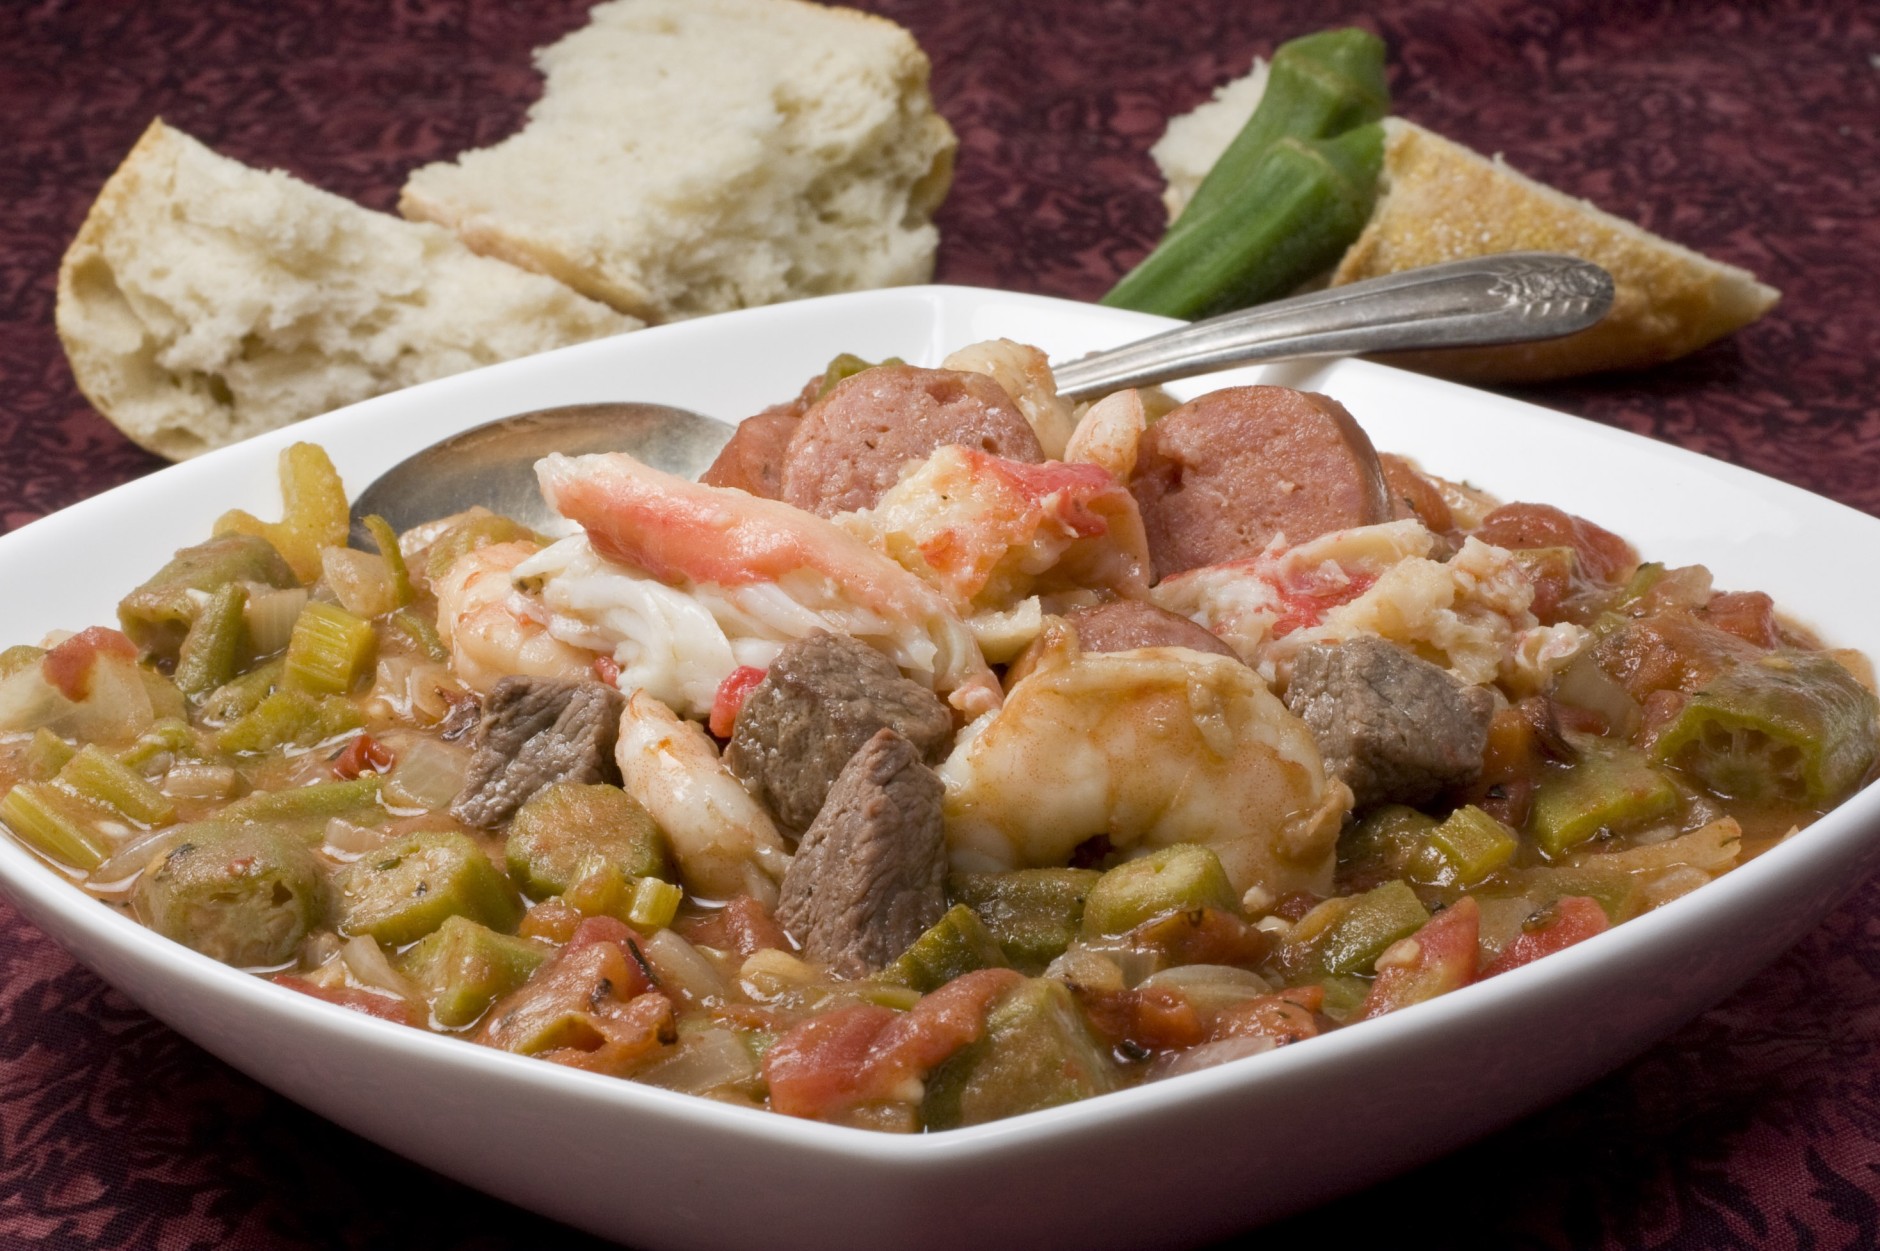 This photo taken Feb. 7, 2010 shows gumbo. Packed with meat and seafood this fast and intense gumbo is a culinary trip to New Orleans. Okra, a must have ingredient, plays prominently in this Mardi Gras inspired dish. (AP Photo/Larry Crowe)